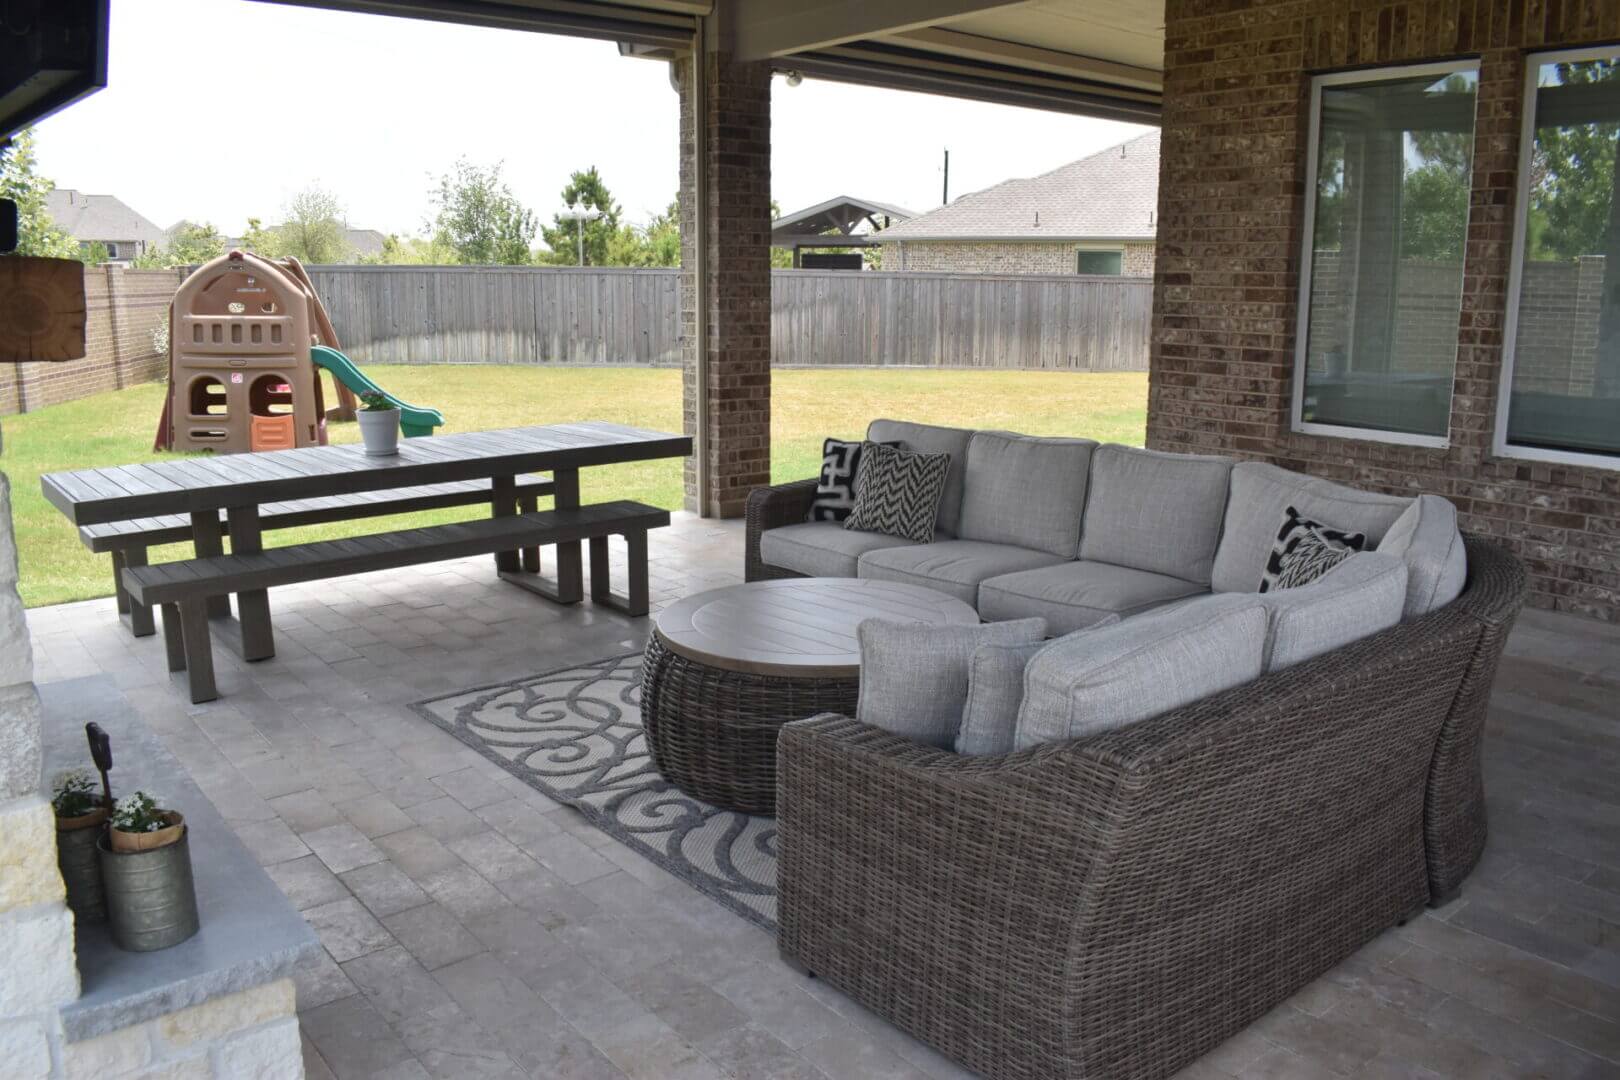 A patio with furniture and a picnic table.